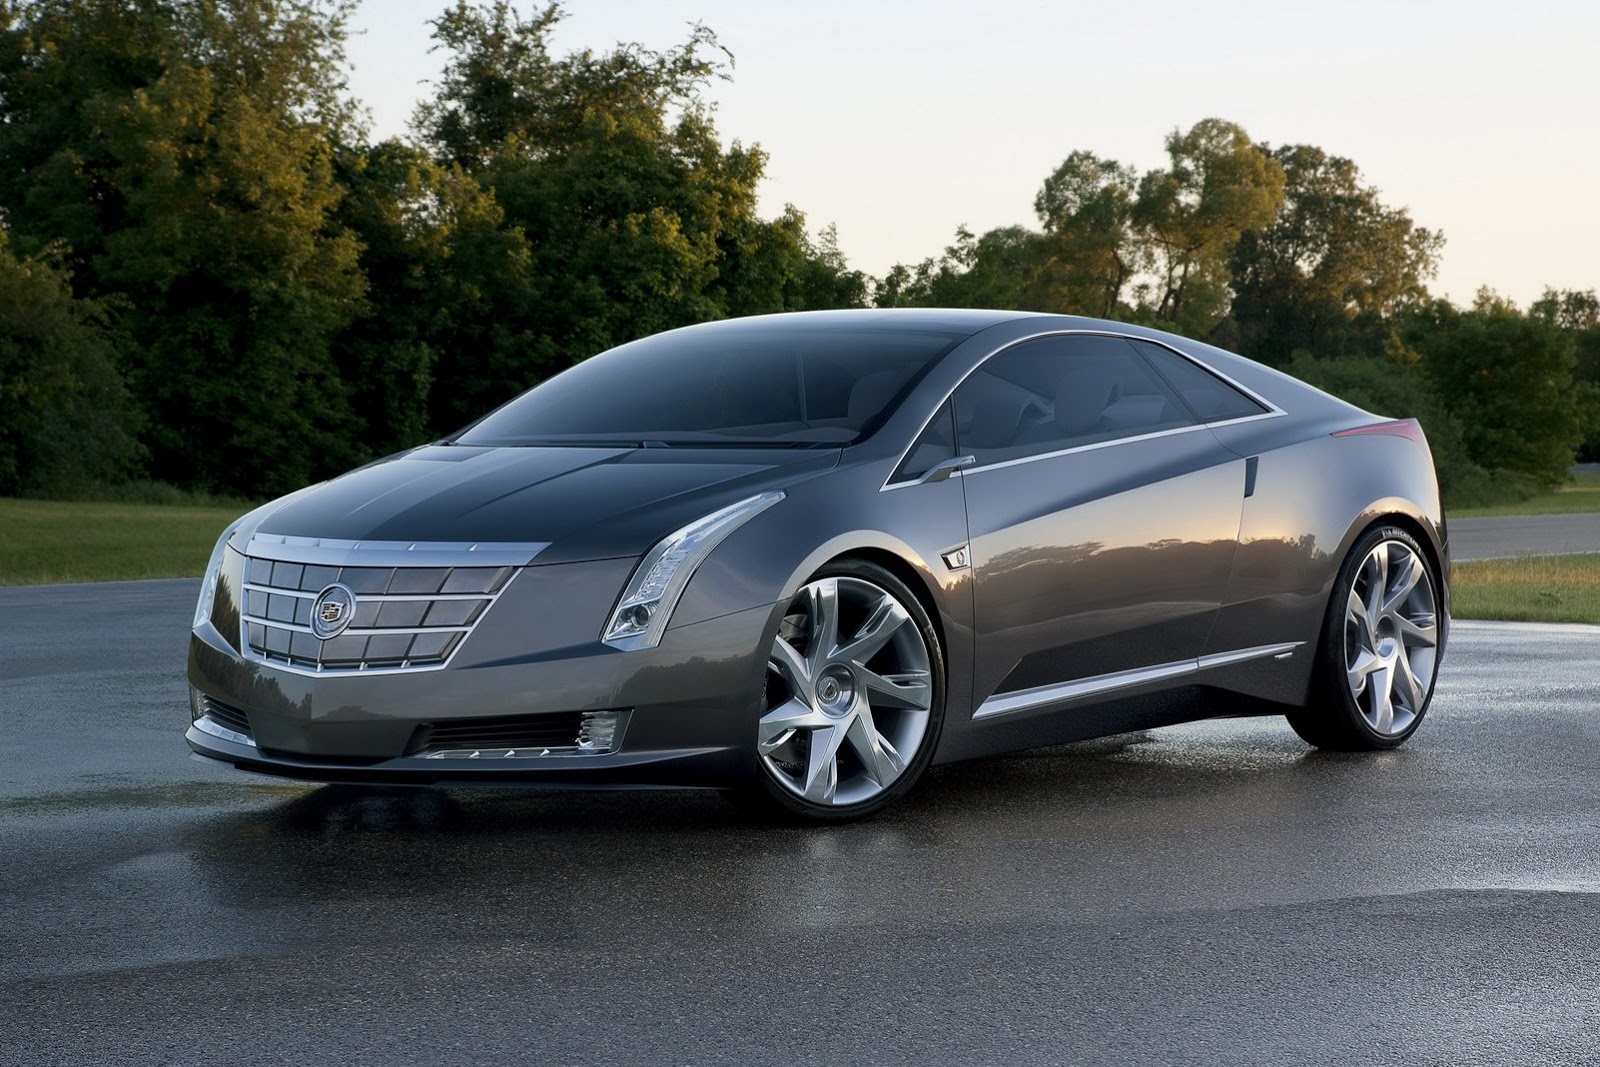 Amazing Cadillac ELR Pictures & Backgrounds